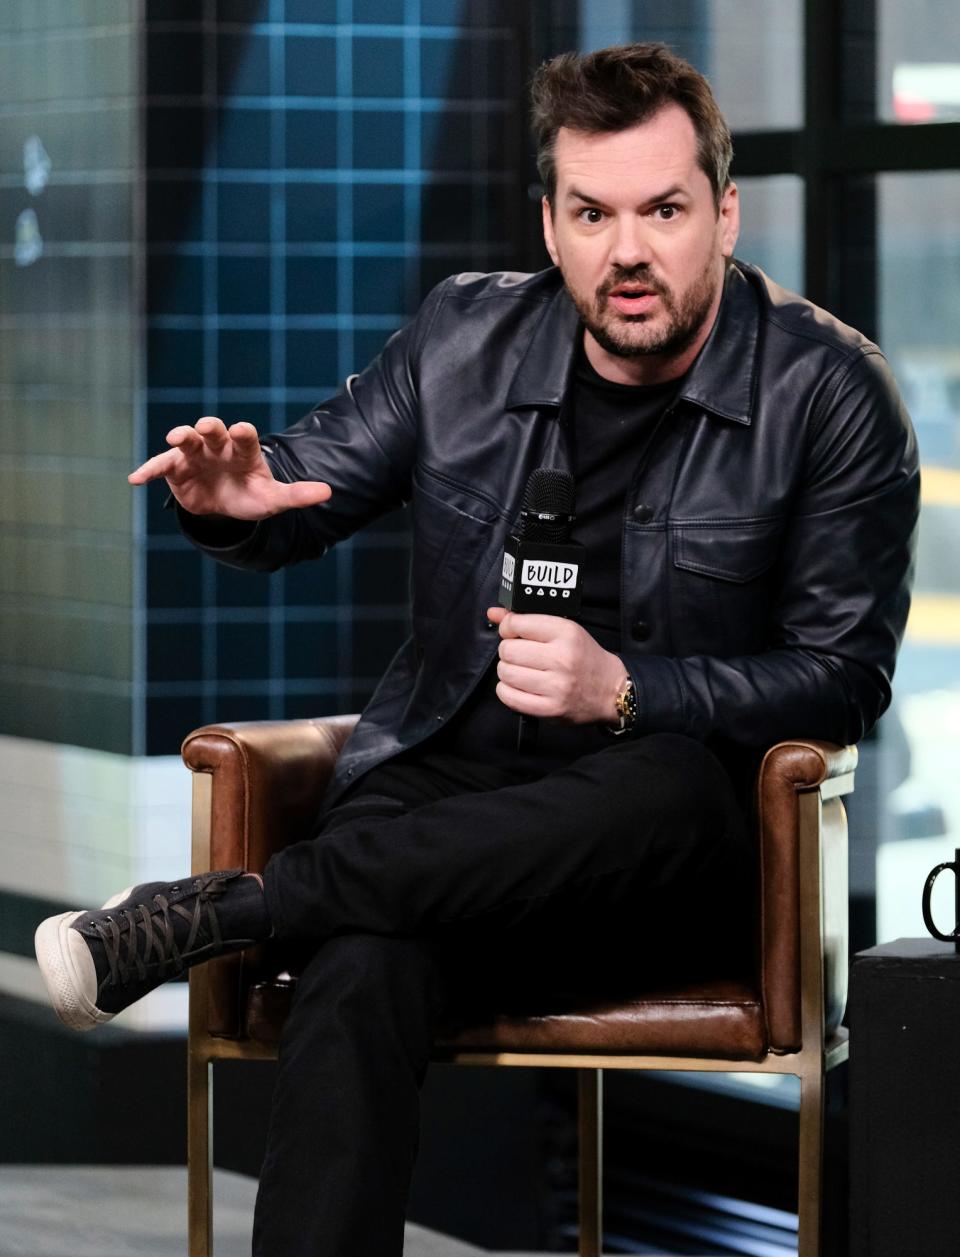 Jim Jefferies is set to perform in February at Straz Center for the Performing Arts along Tampa Riverwalk.